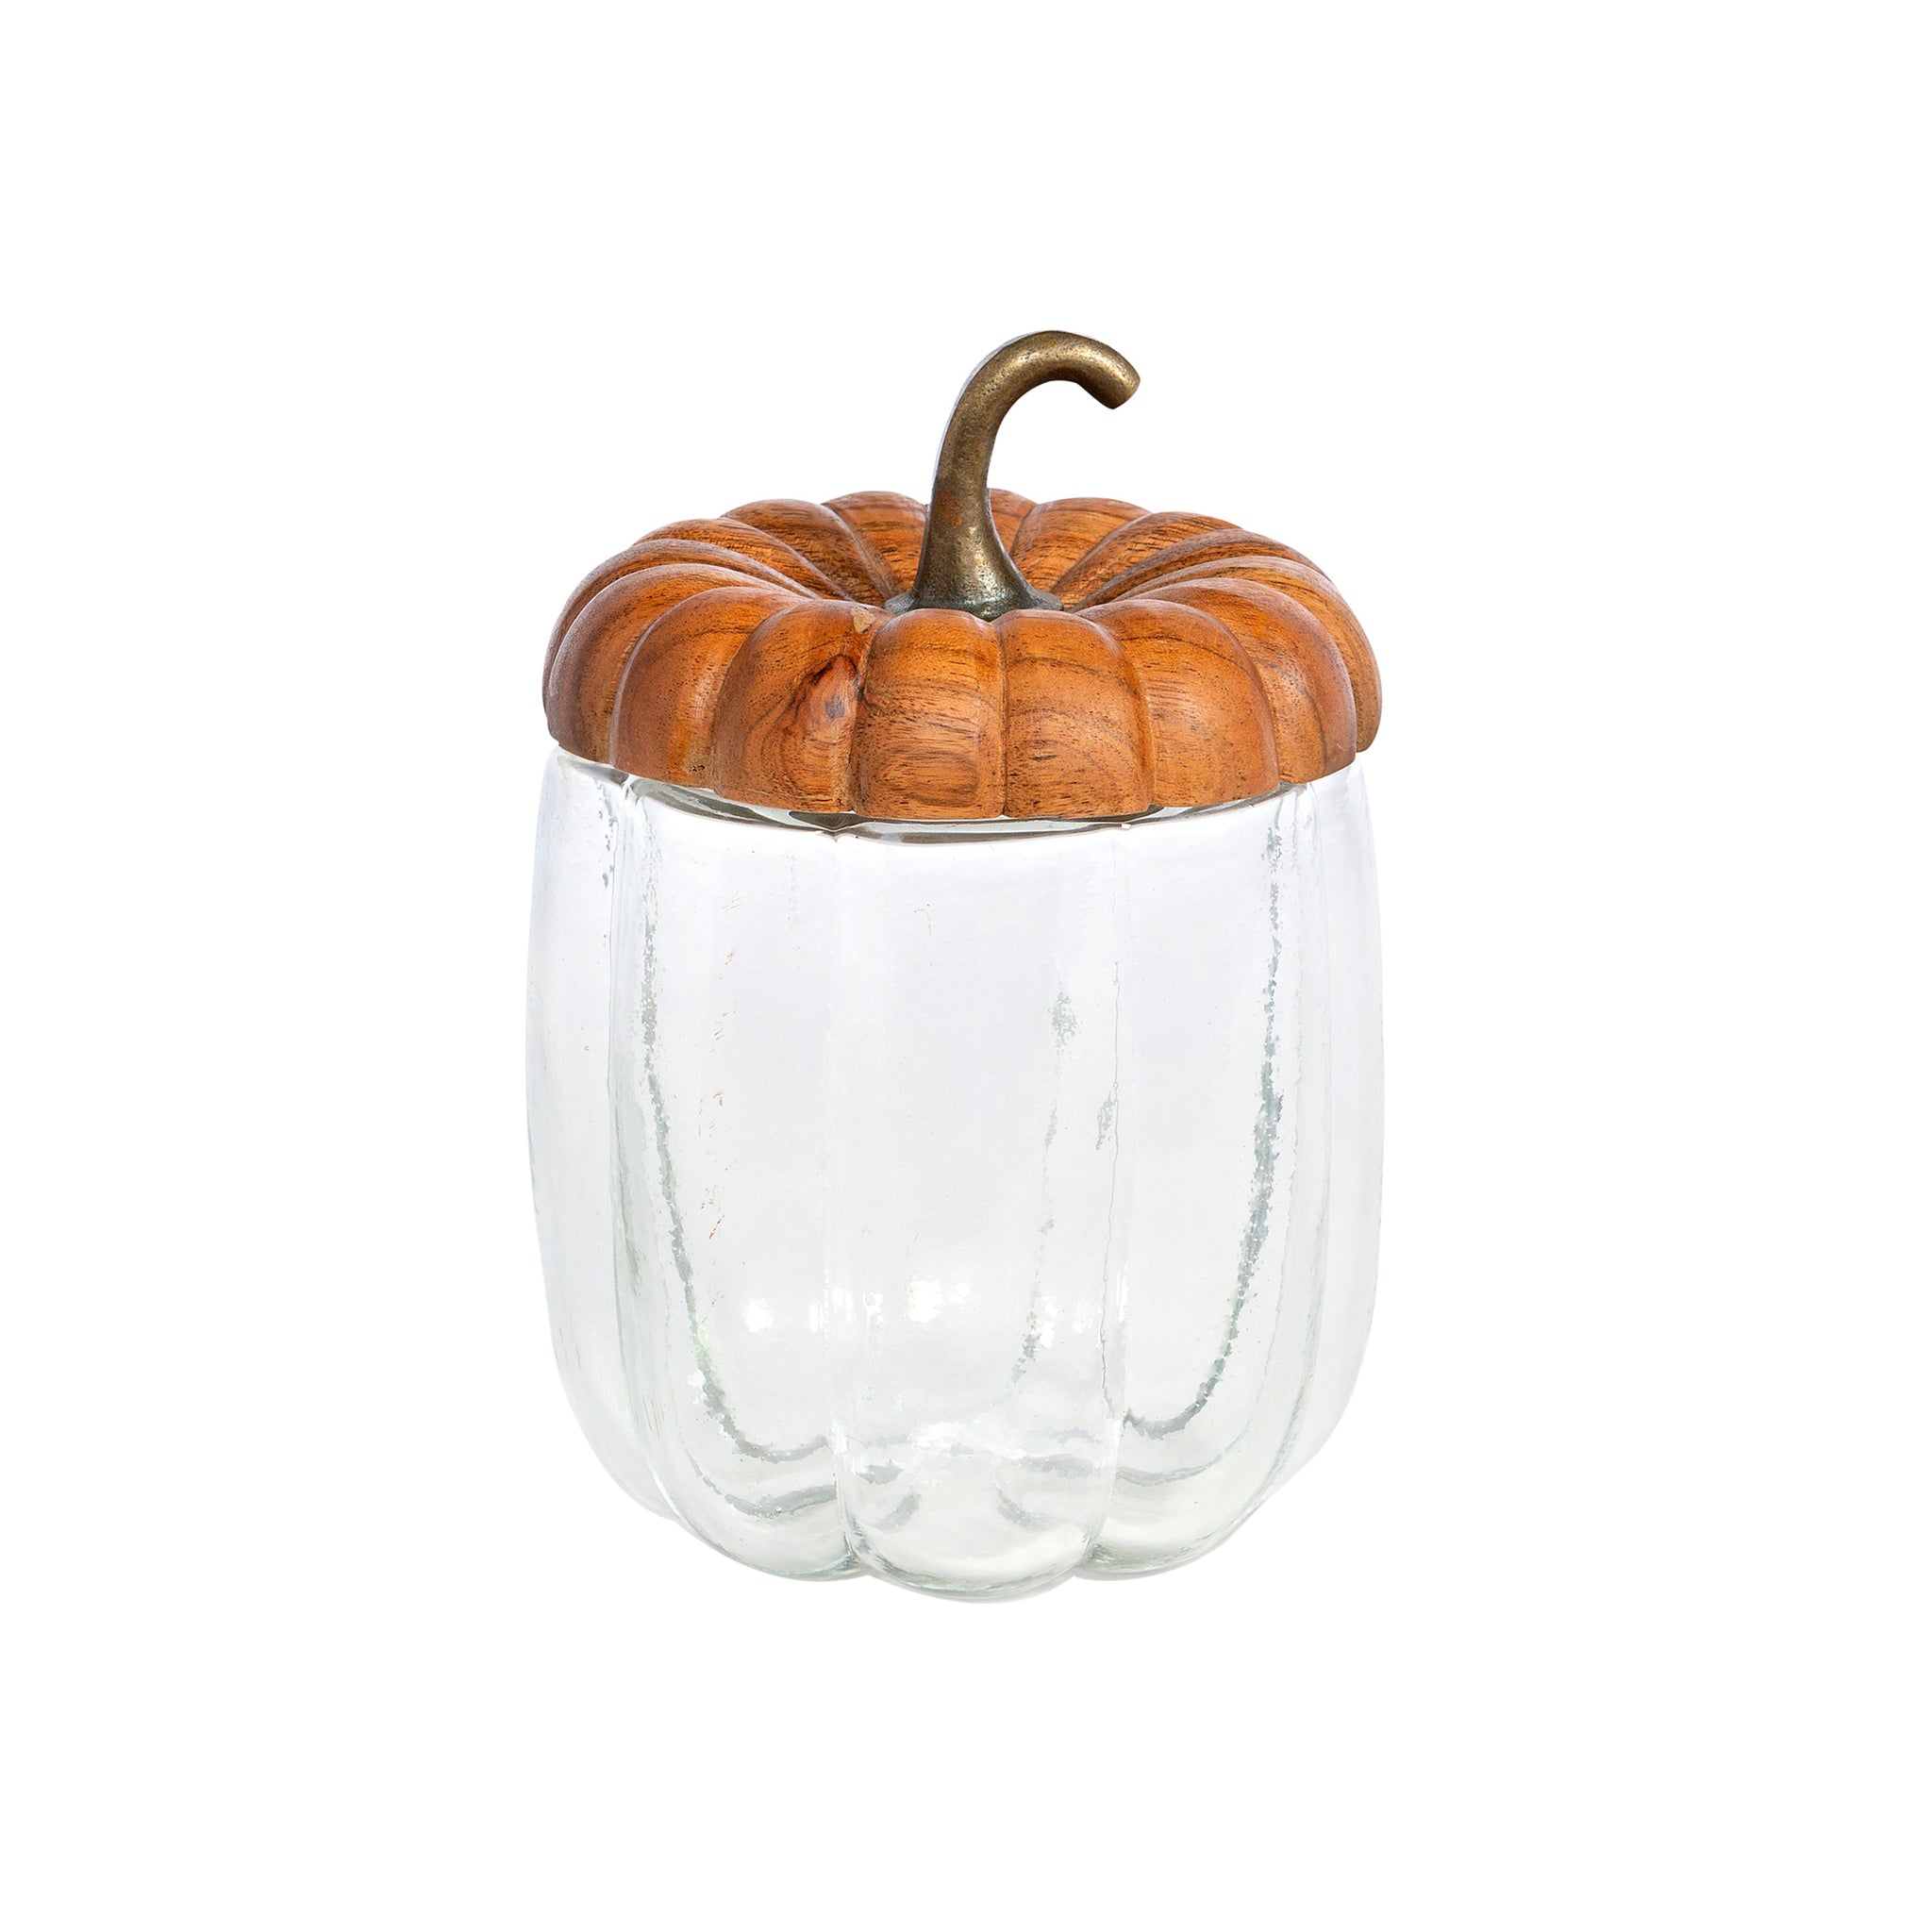 Winter Squash Canister